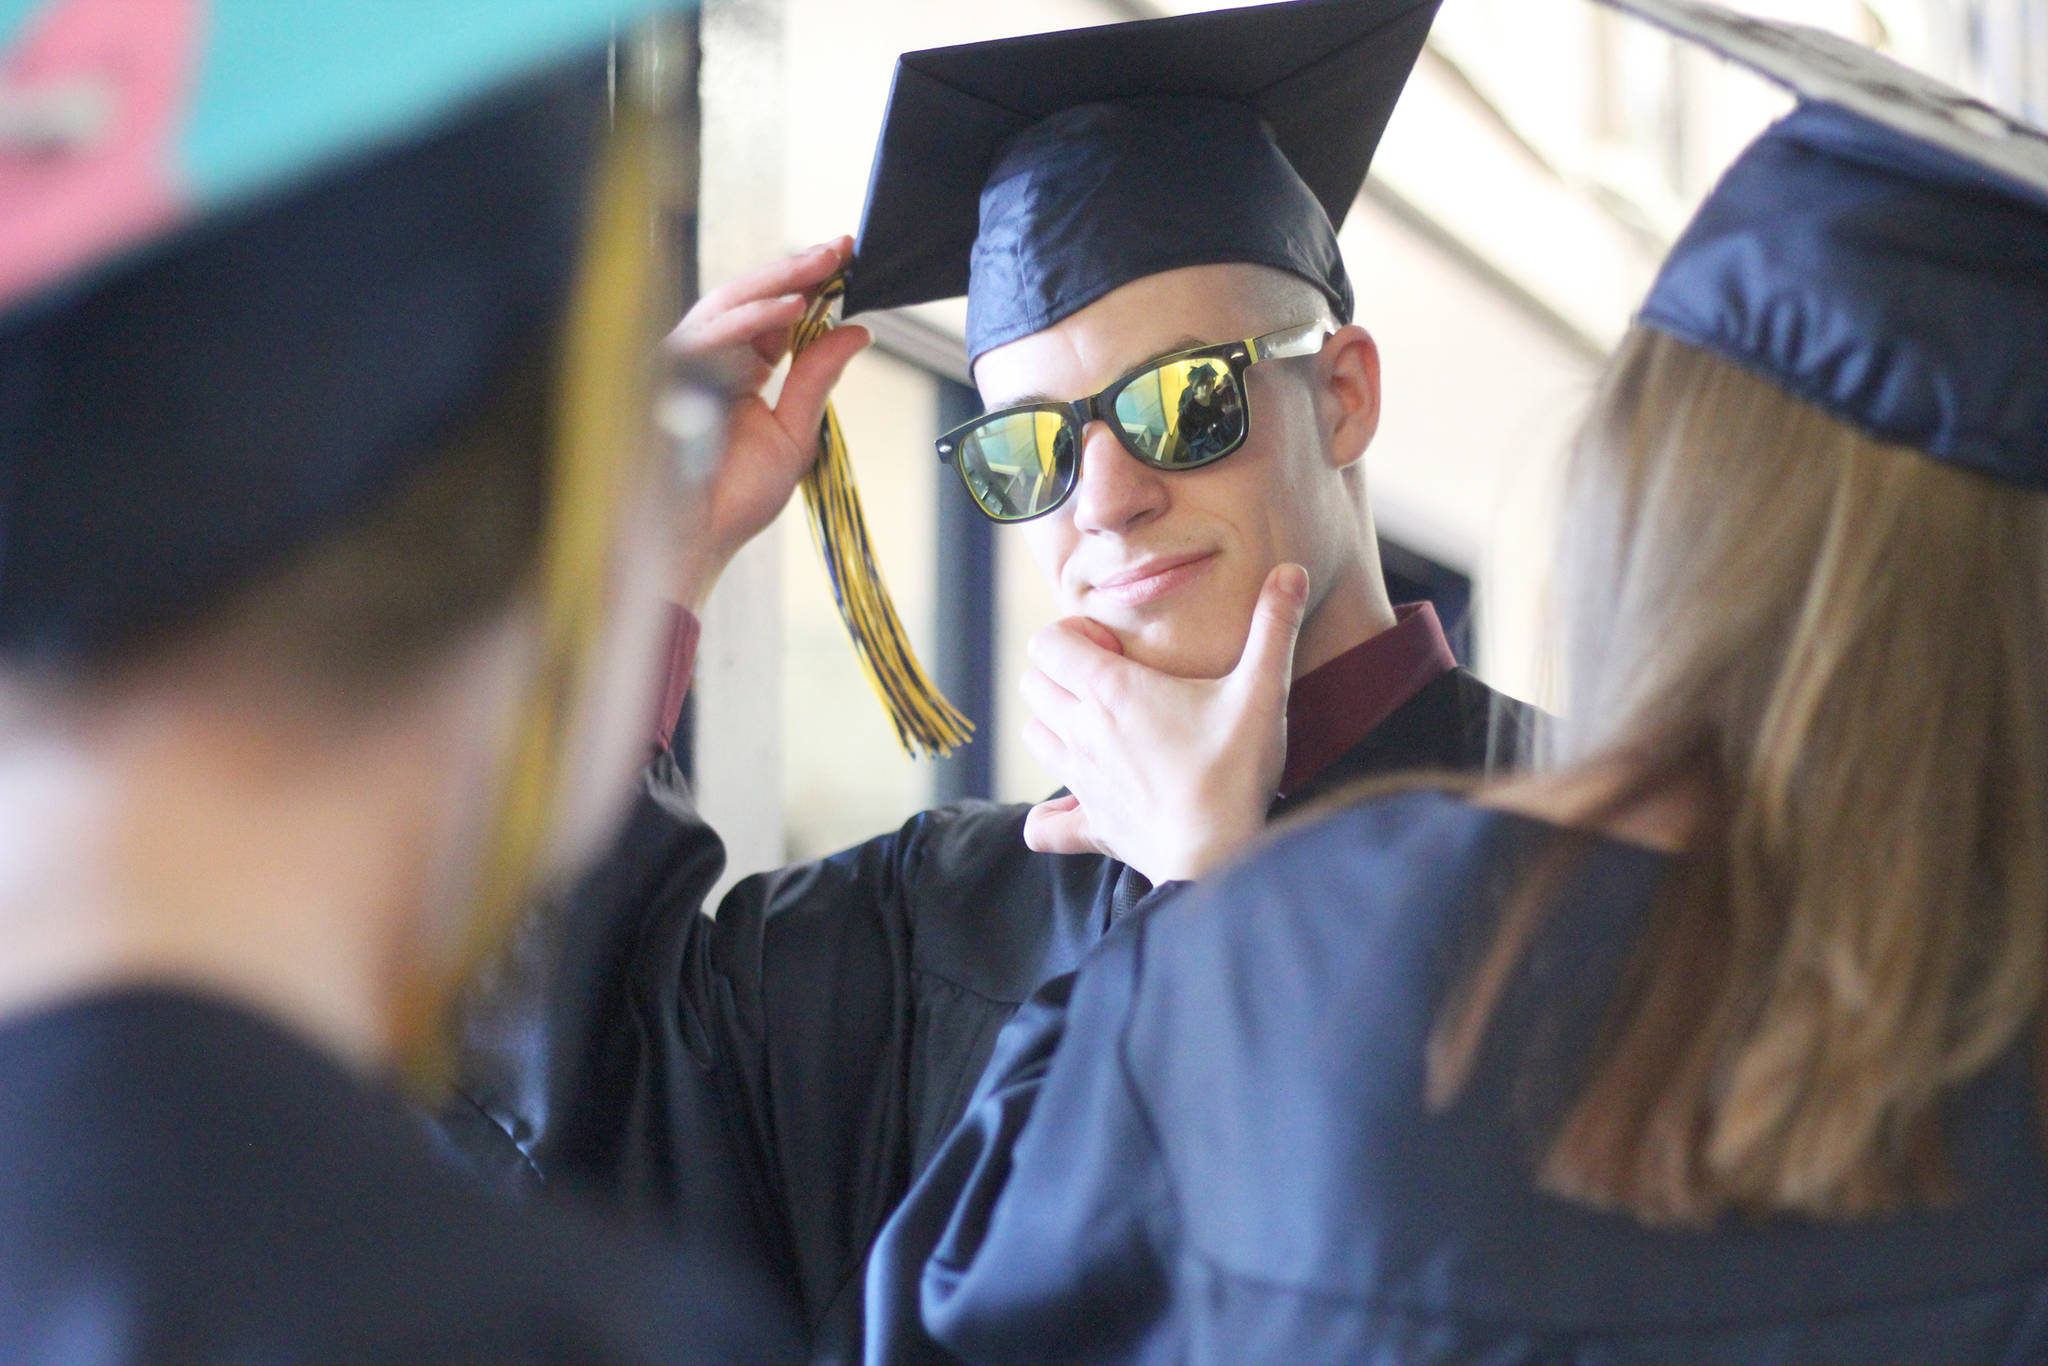 Isabella Koch helps Garrett Koch perfect the finishing touches before they walk in their graduation ceremony Tuesday, May 21, 2019 at Ninilchik School in Ninilchik, Alaska. They are two of four total Ninilchik graduates this year. (Photo by Megan Pacer/Homer News)